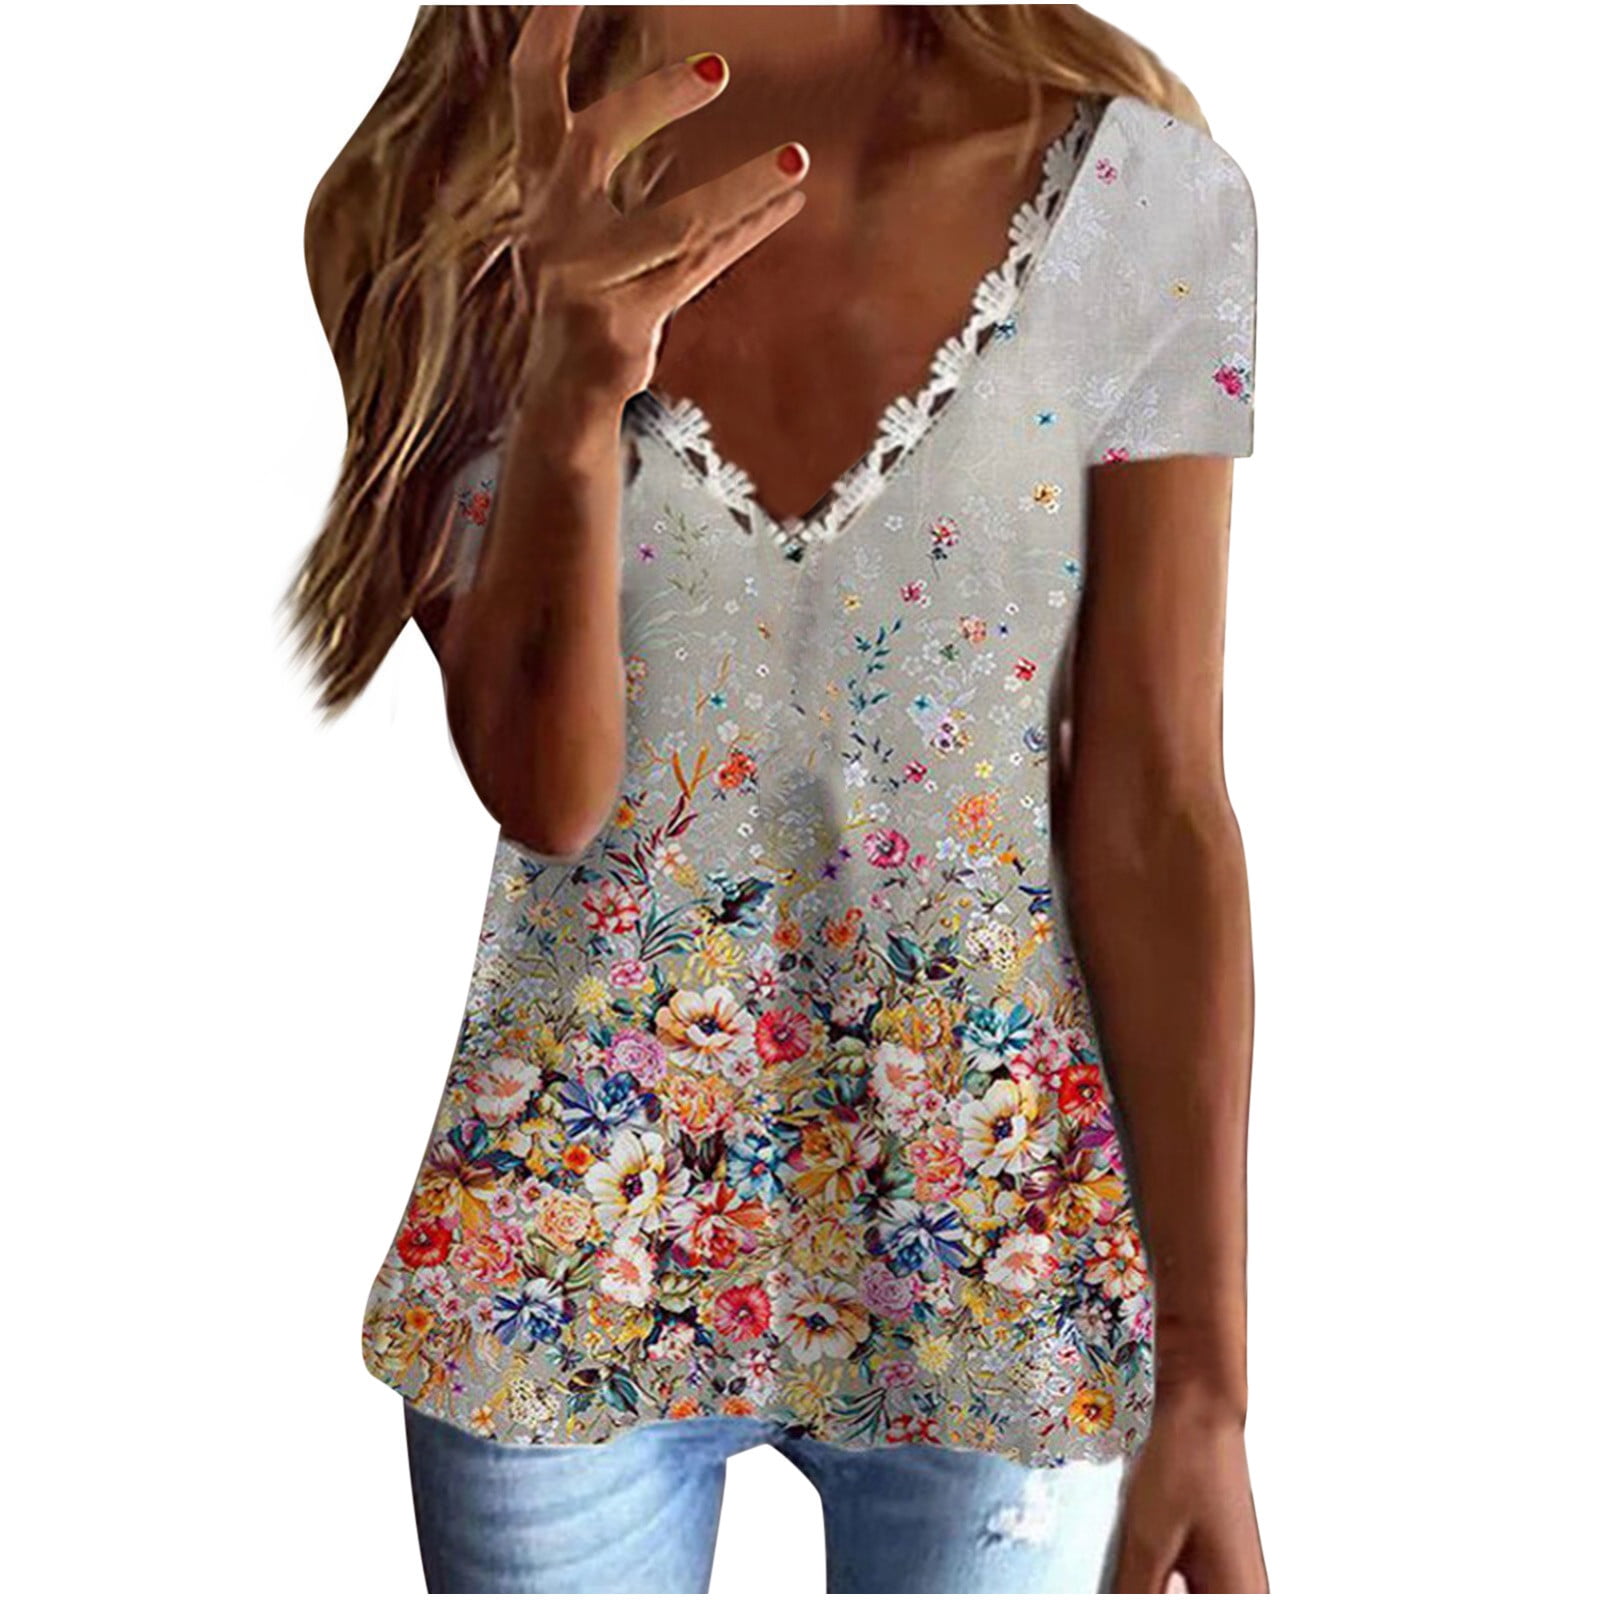 Womens Summer Casual Short Sleeve Shirt Tops Blouse Lace Floral Cotton Tops 